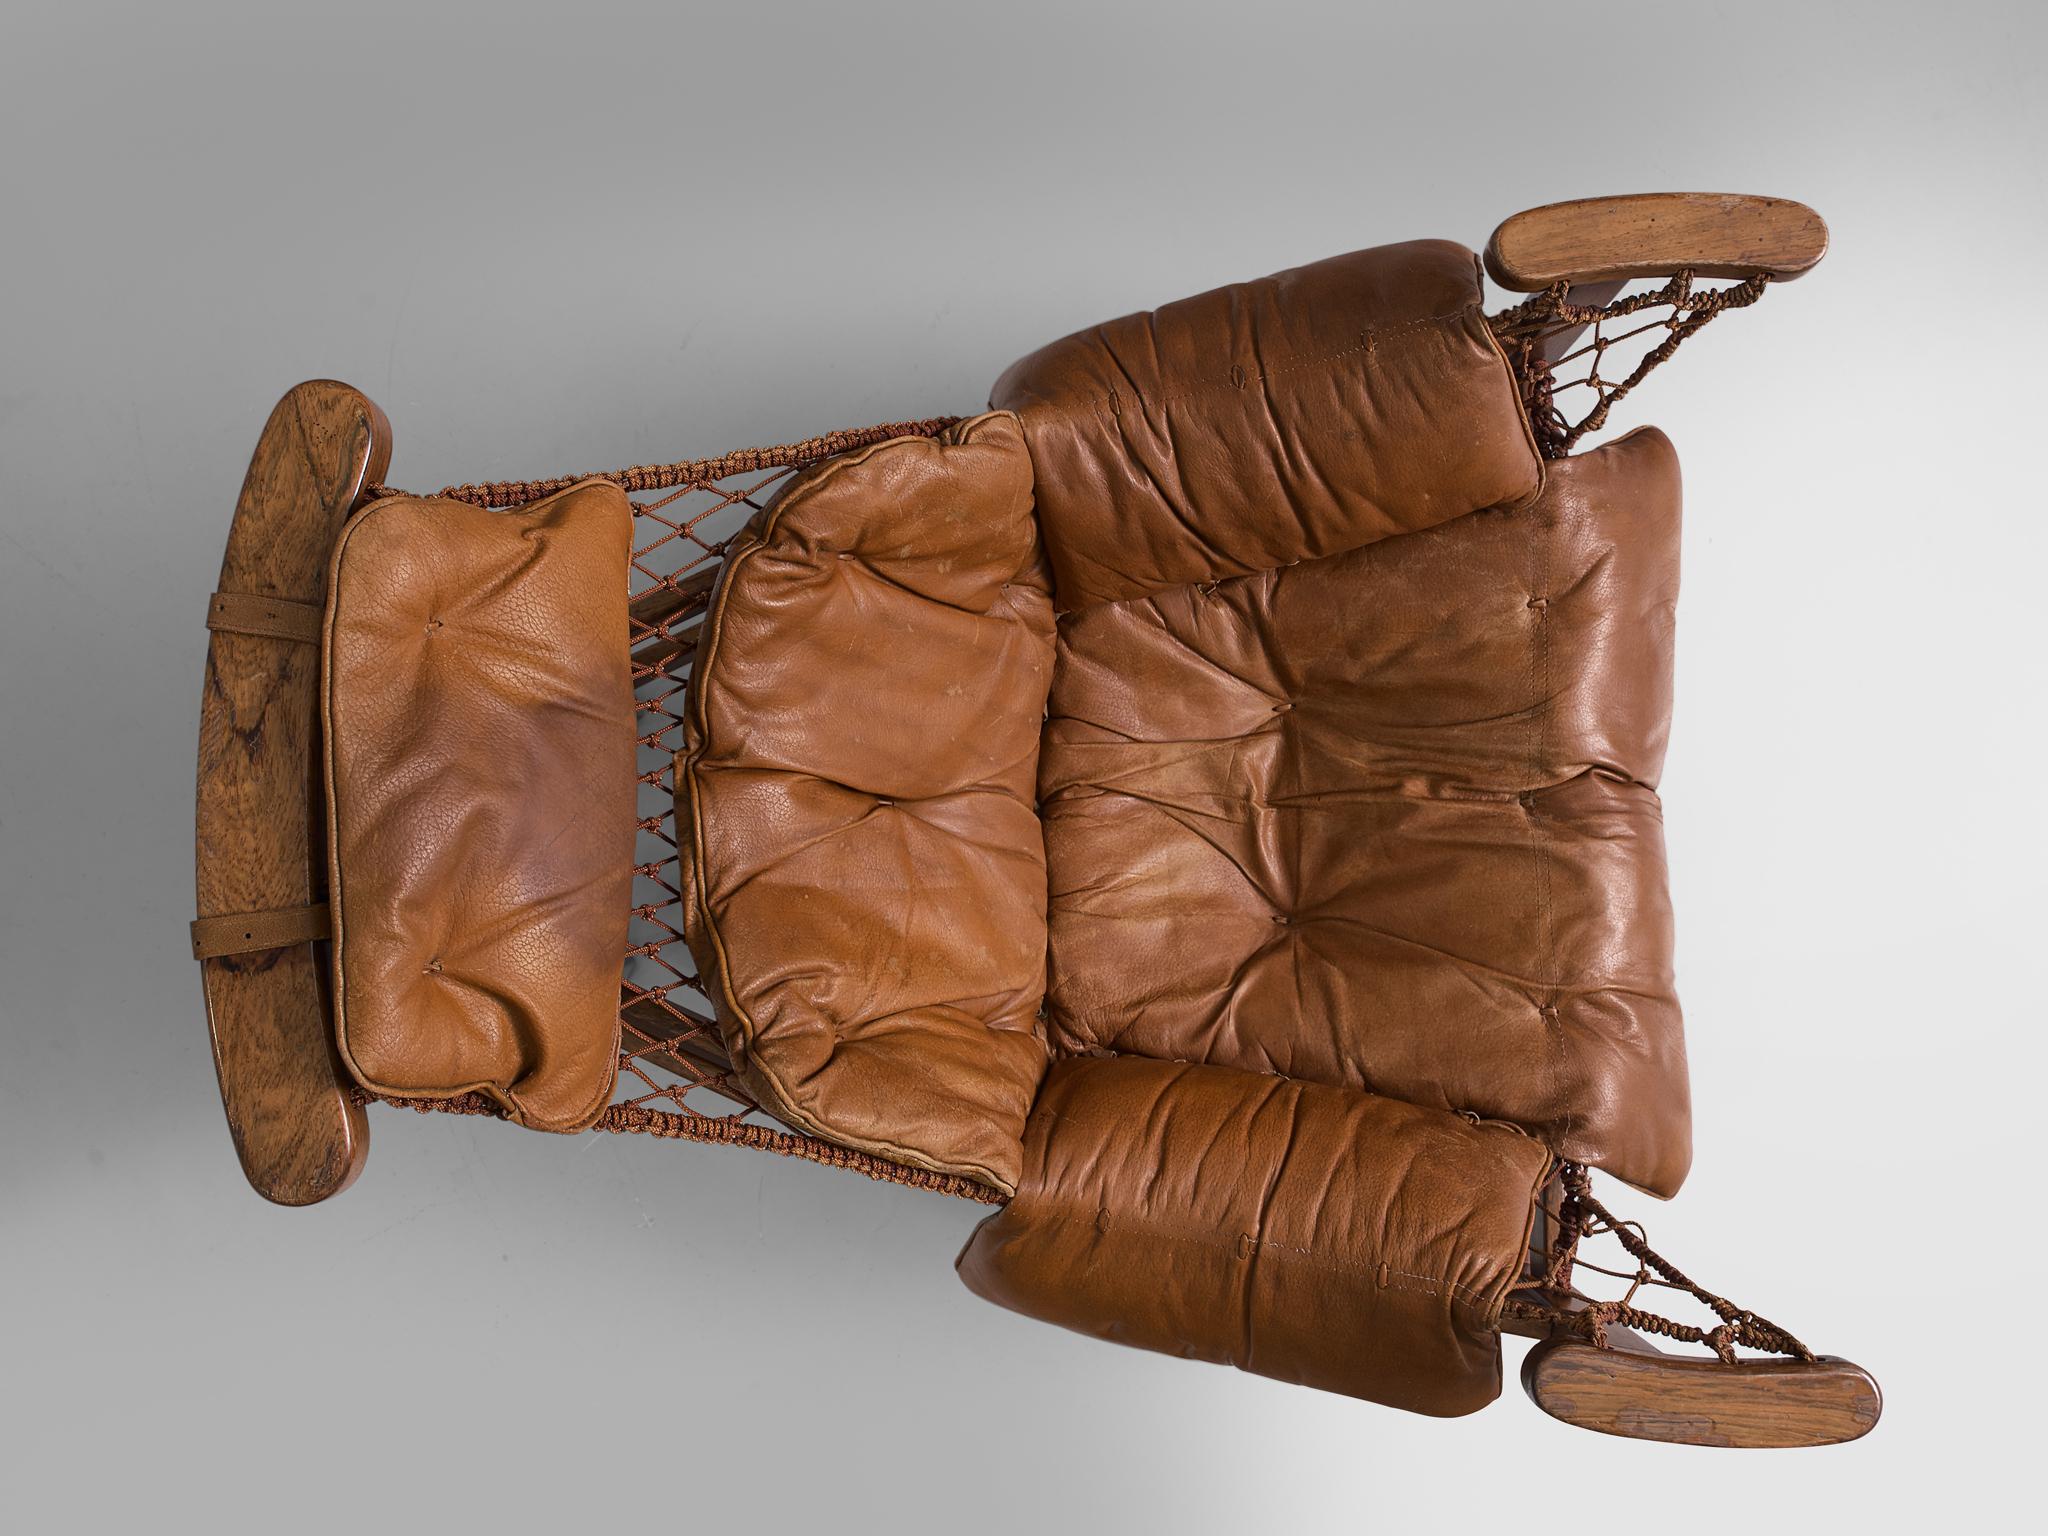 Jean Gillon Patinated 'Jangada' Lounge Chair in Cognac Leather 1